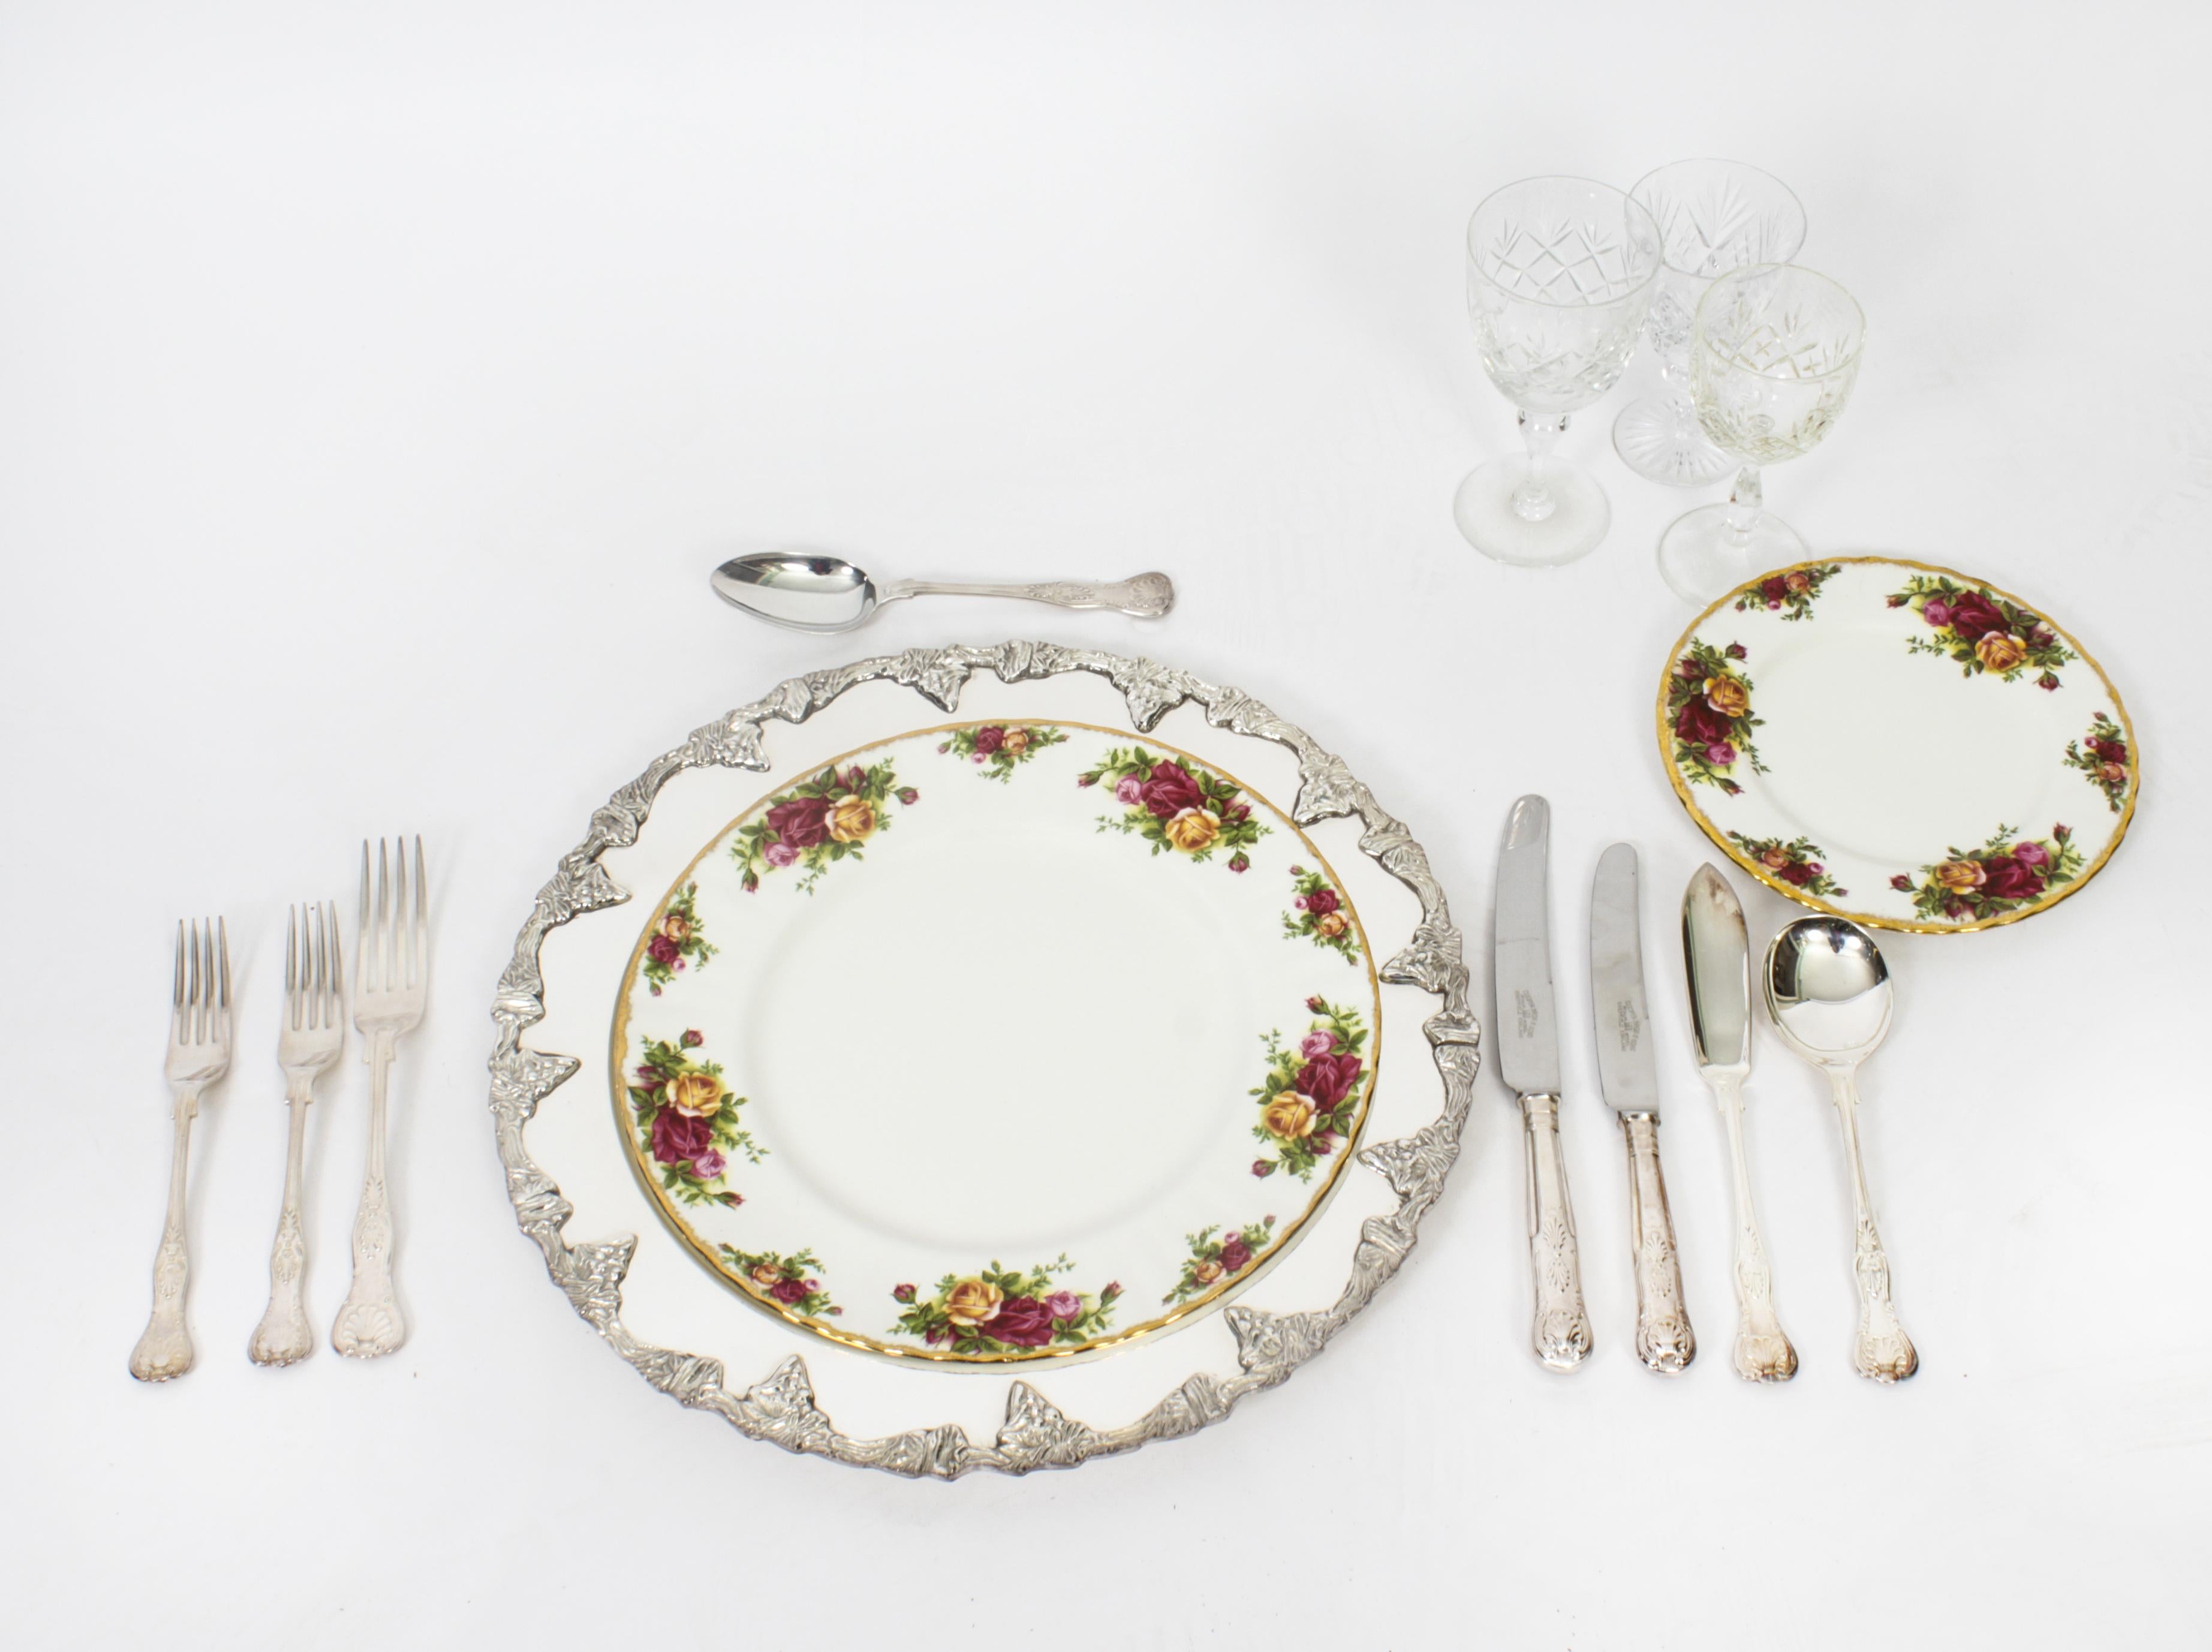 This is an exquisite set of fourteen decorative silver plated under plates, mid 20th Century in date.

Each plate is beautifully  decorated with bunches of grapes and leafy vines around the rim.

The dishes are truly stunning and in really excellent